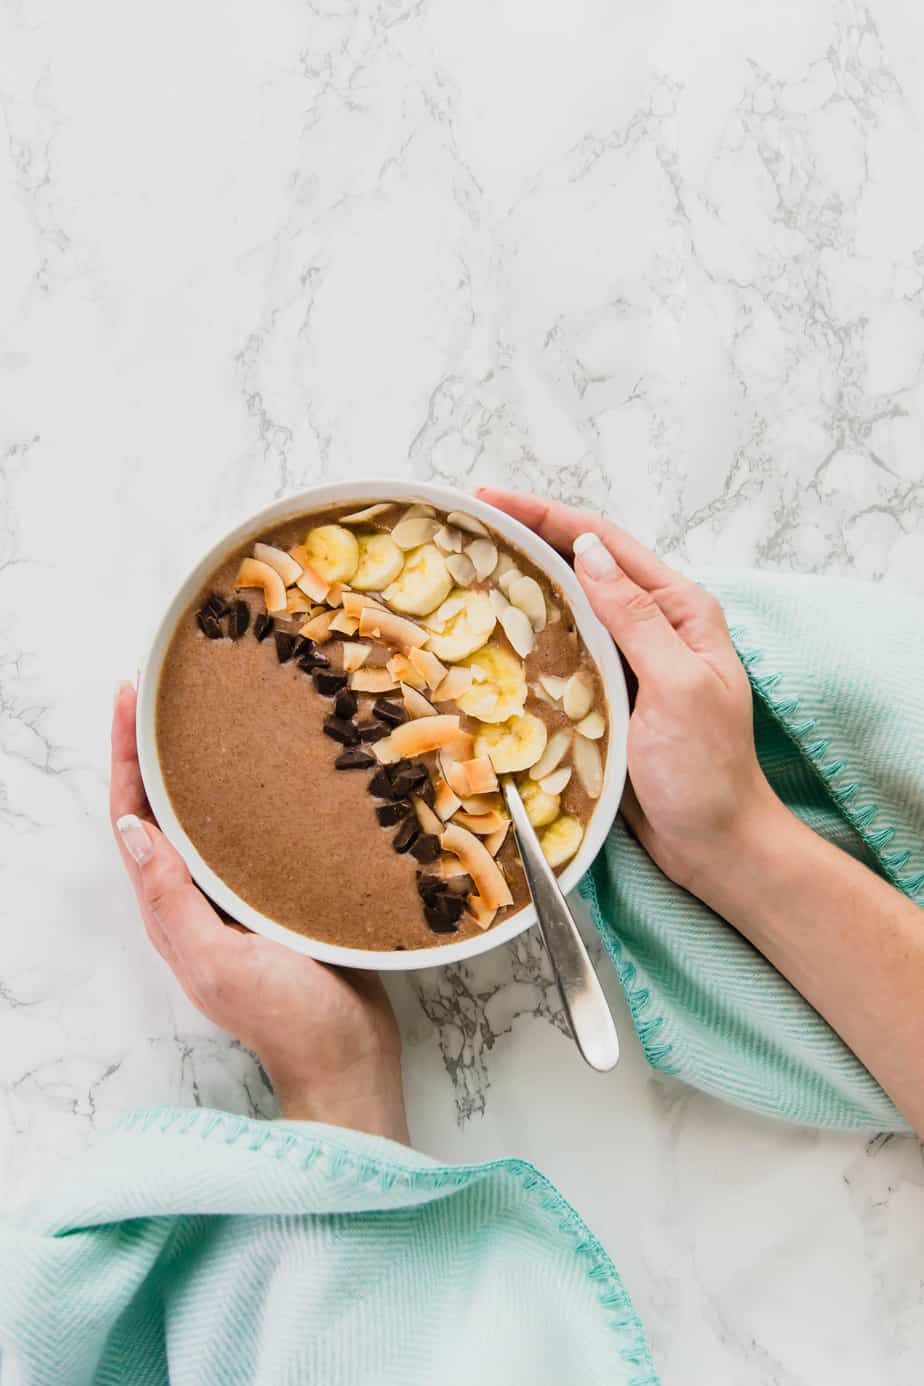 This Almond Butter Smoothie Bowl is the ultimate healthy indulgence, made with delicious almond butter, bananas and a few other delicious things, it will be your new favourite go-to recipe for a healthy vegan treat or meal.